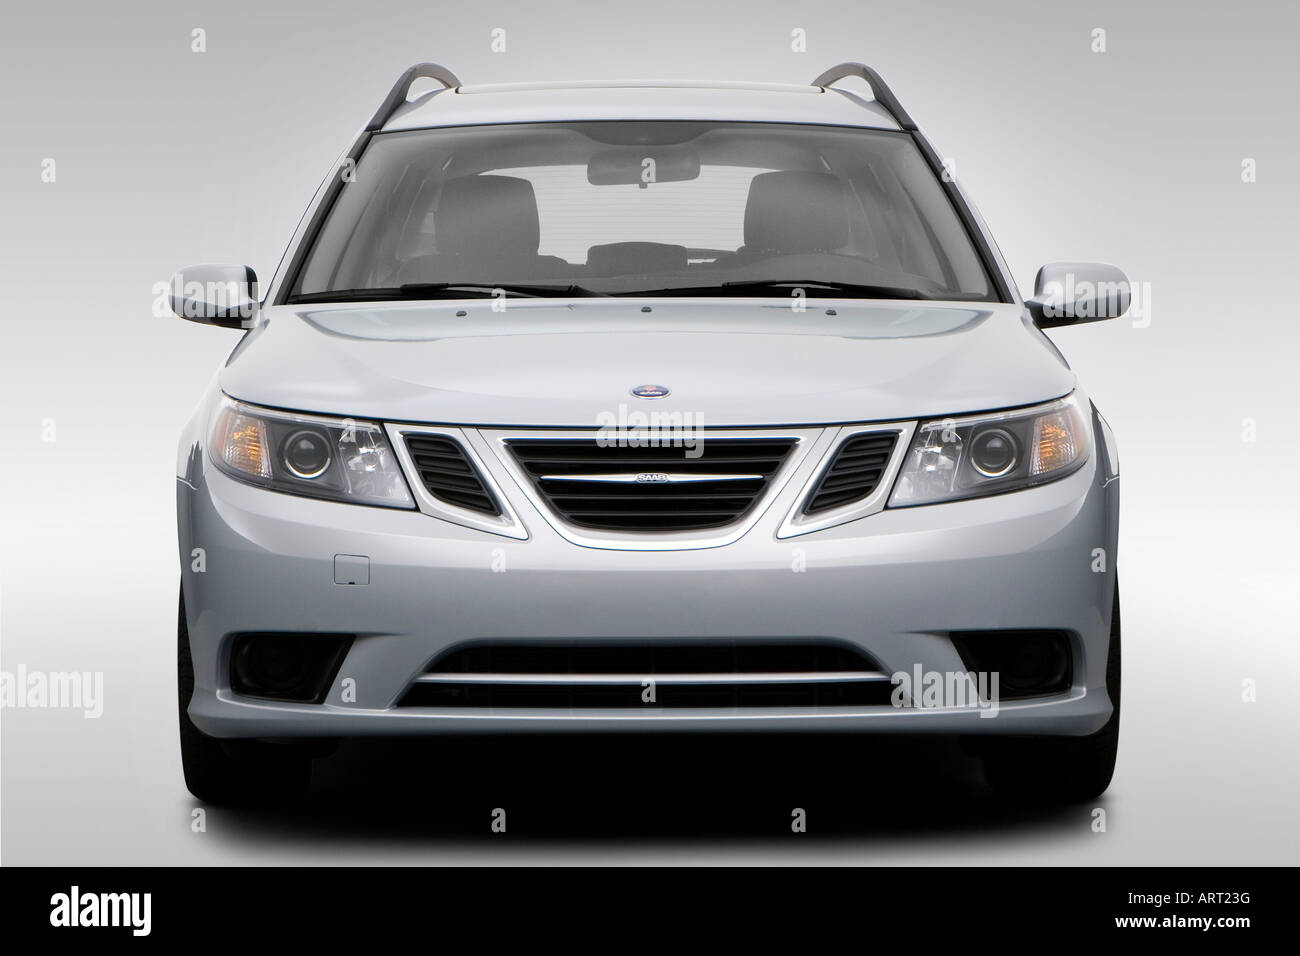 2008 Saab 9-3 Sport Combi in Silver - Low/Wide Front Stock Photo